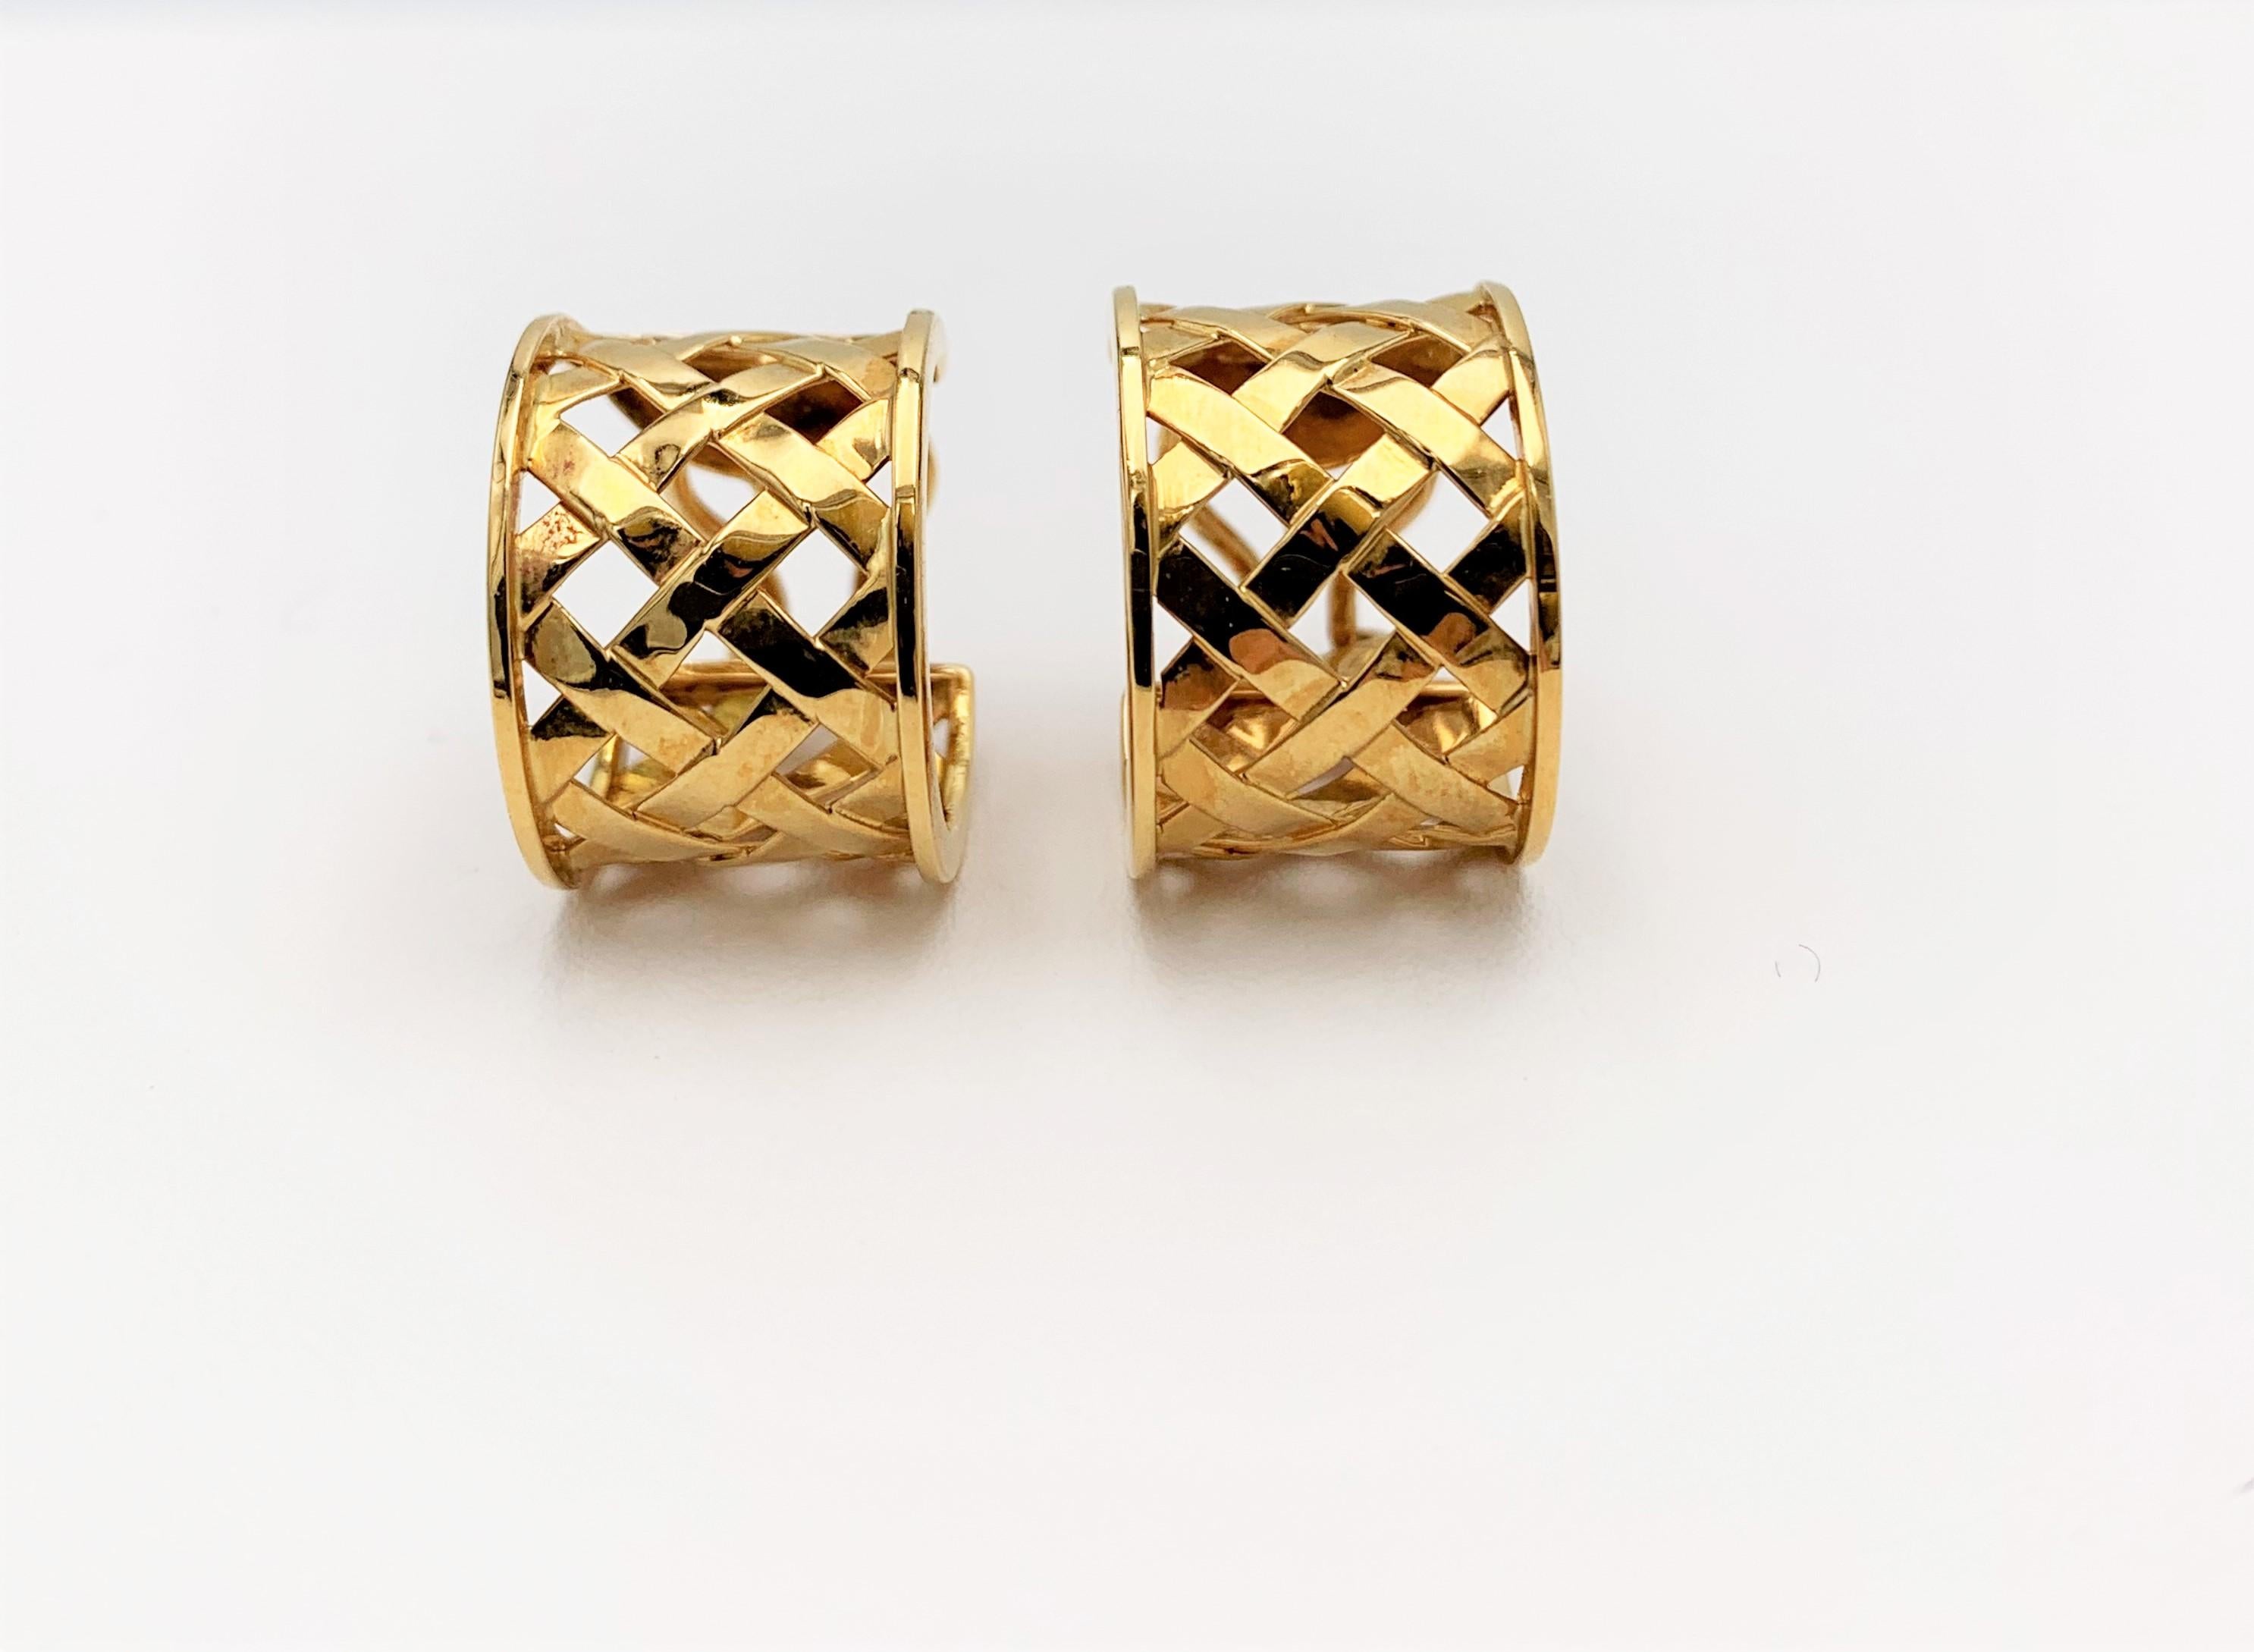 Authentic Verdura 'Criss Cross' earrings crafted in 18 karat yellow gold. Signed Verdura, 750. Clip backs with posts. Not presented with original box and/or papers. CIRCA 2000s.